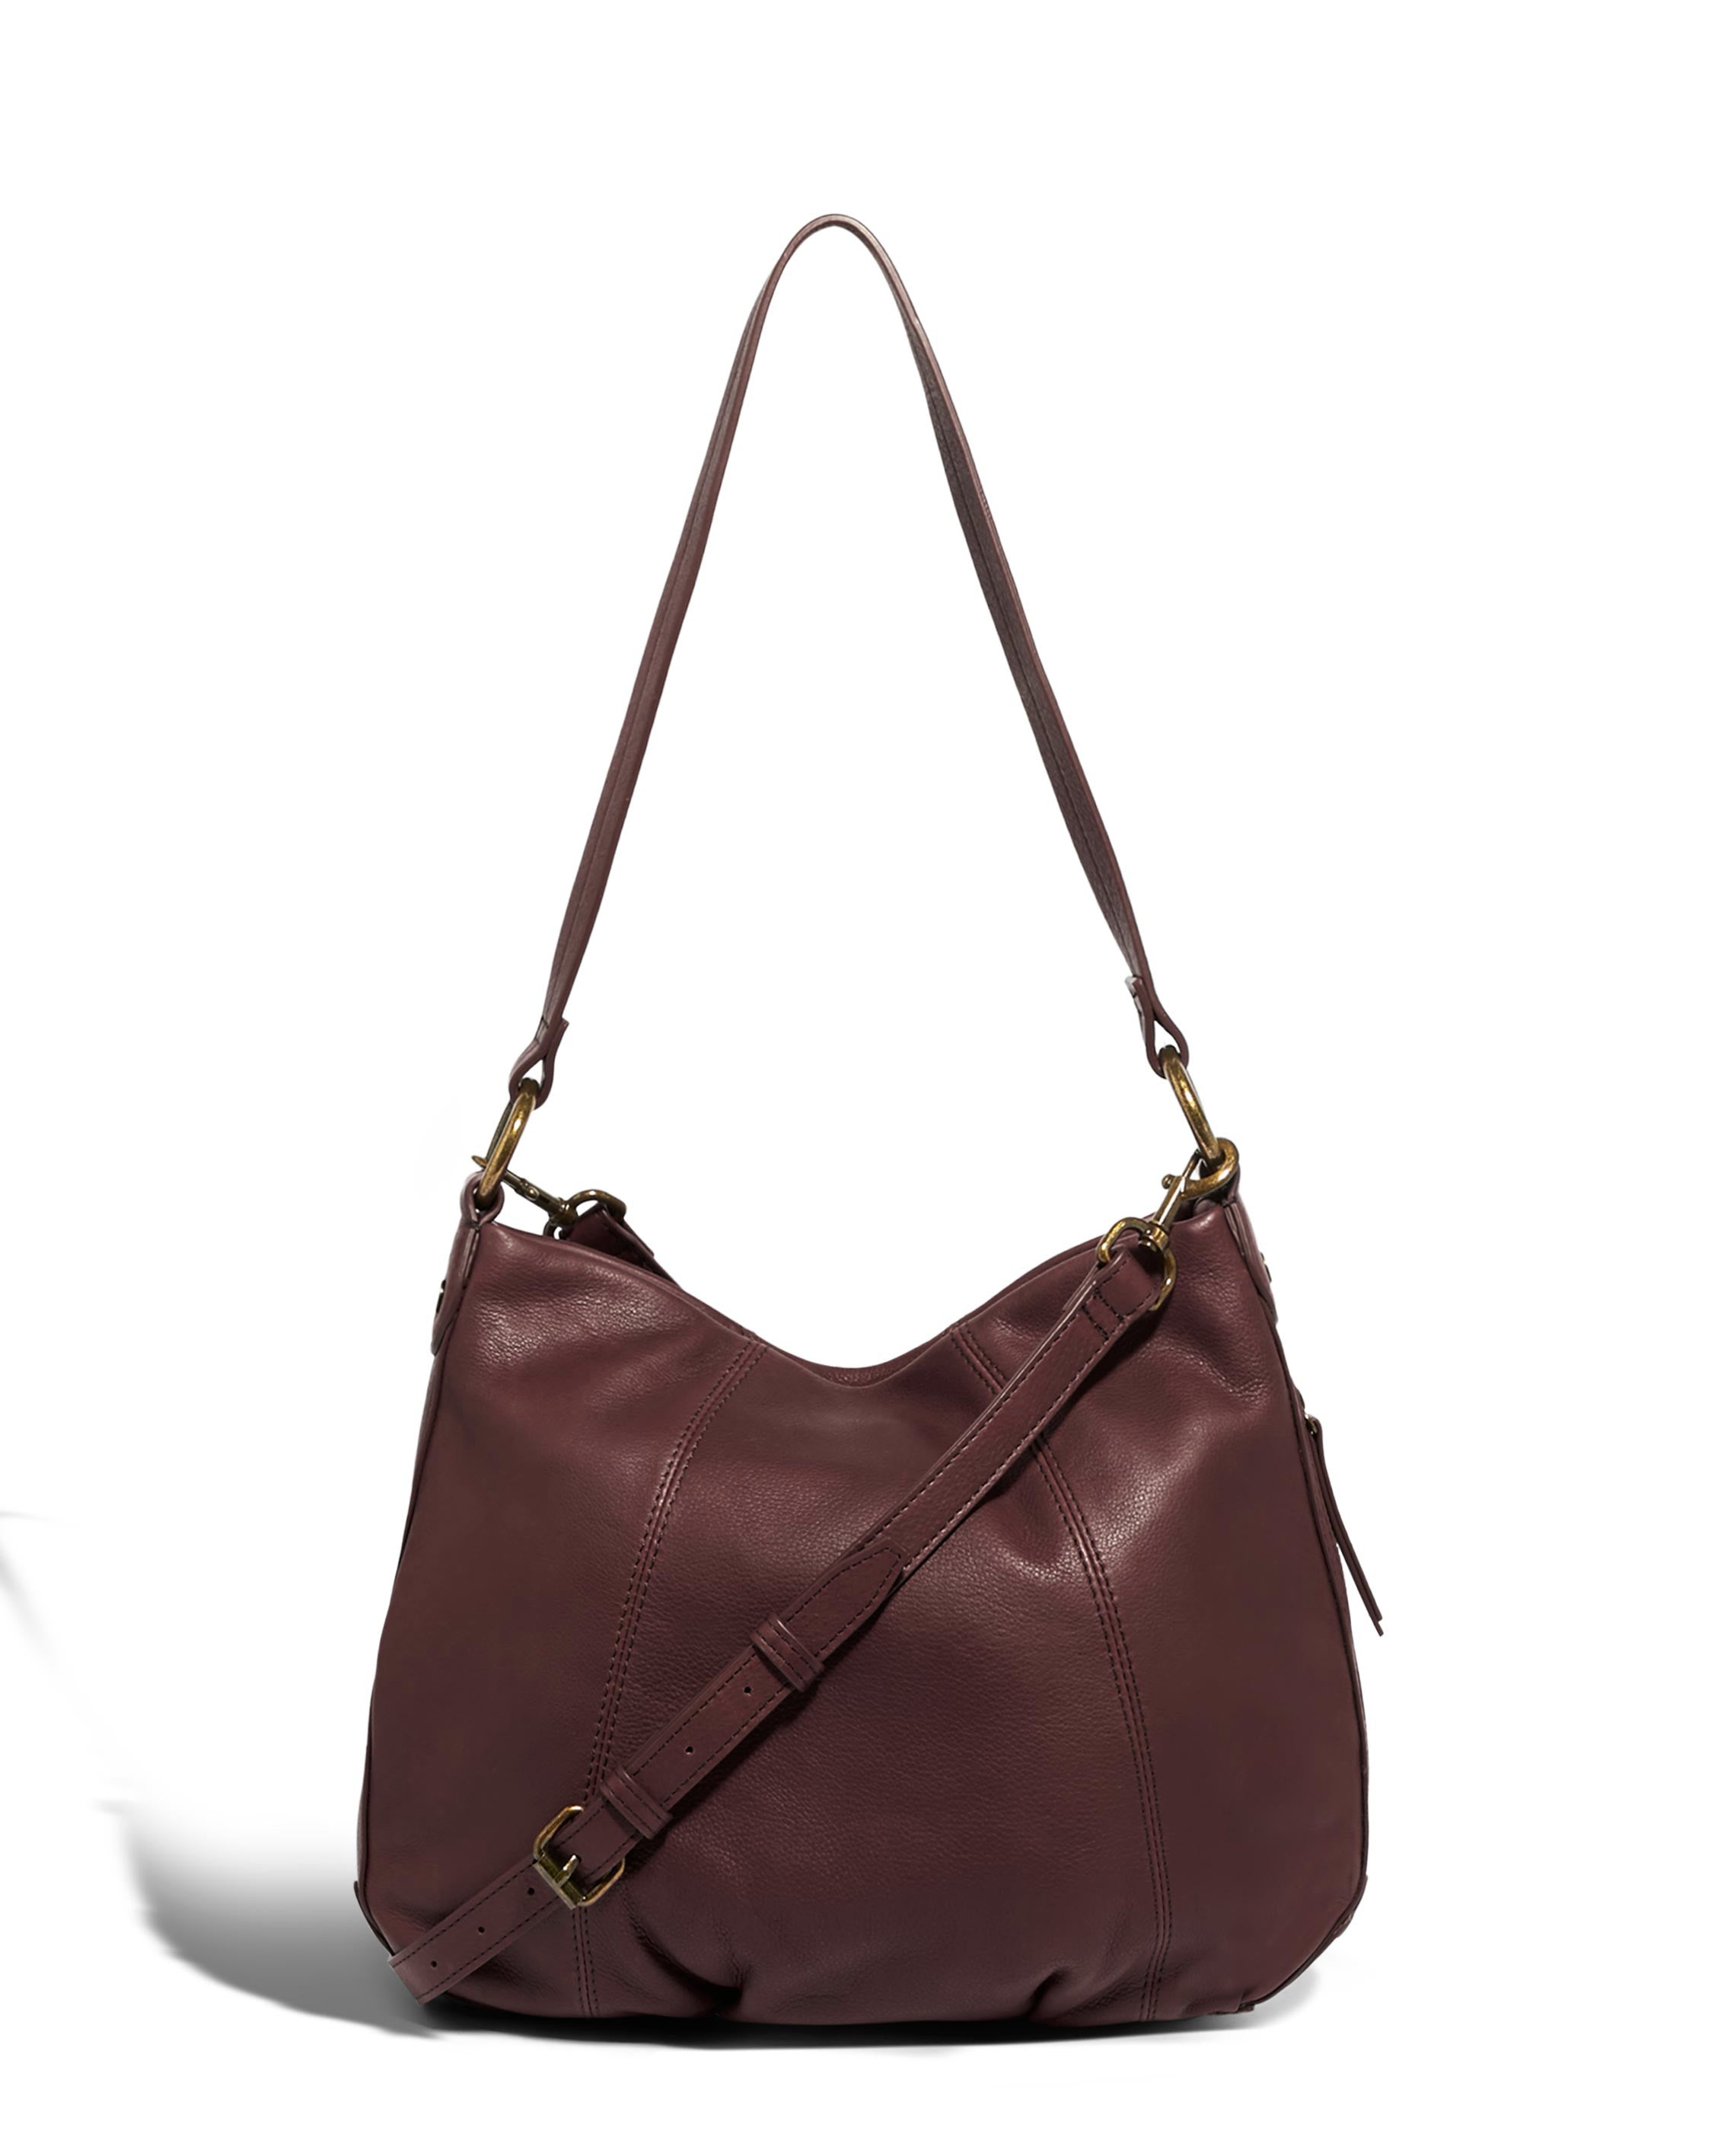 American Leather Co. Vienna Convertible Hobo Honeycomb